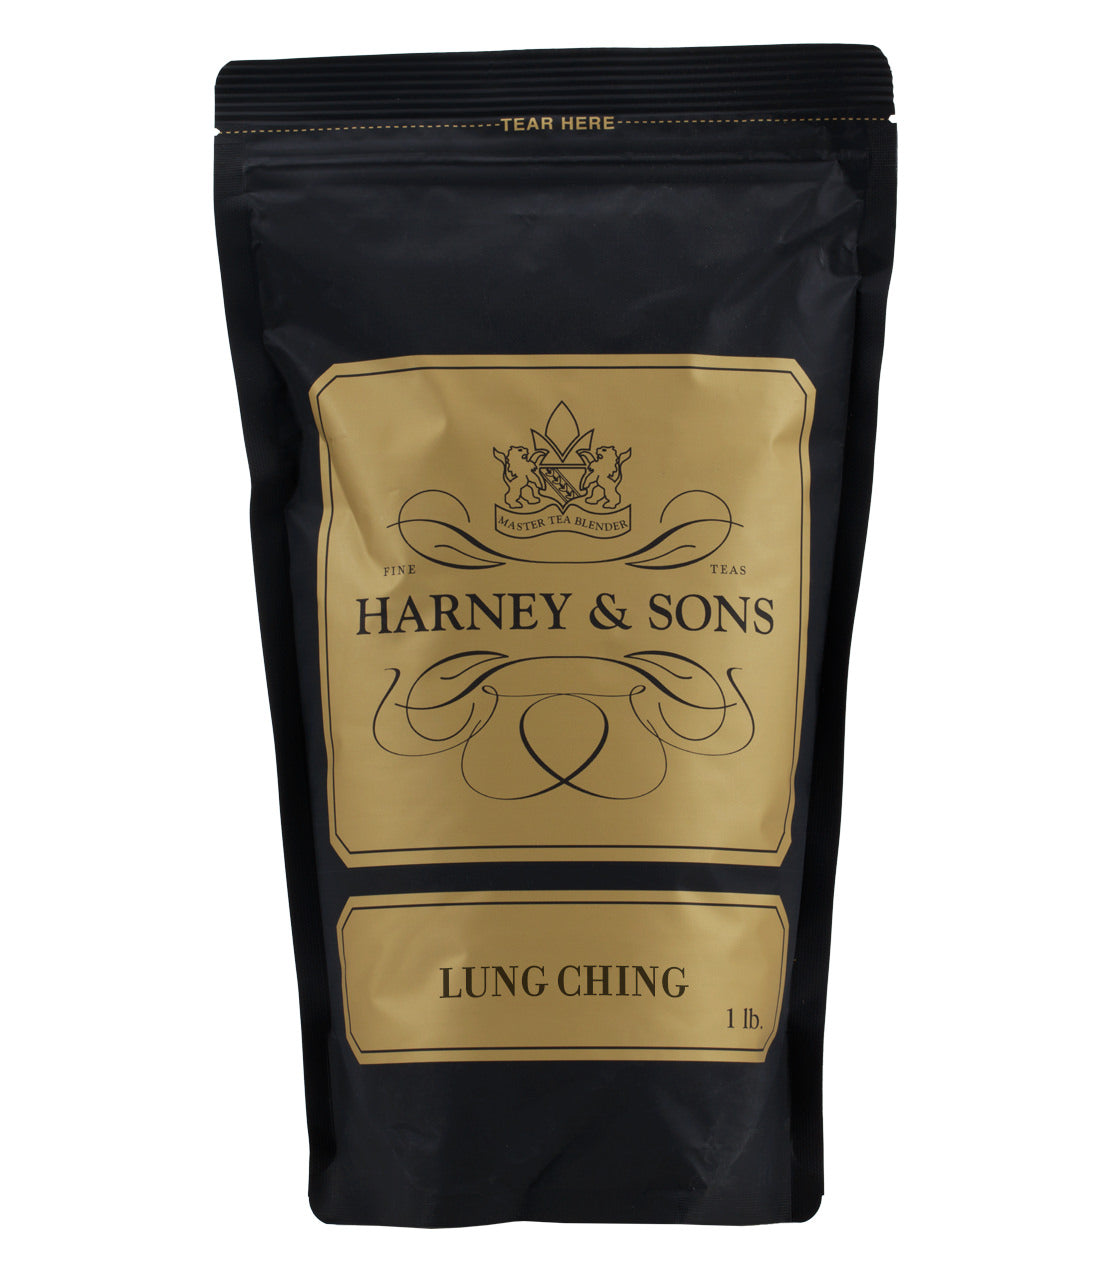 Lung Ching - Loose 1 lb. Bag - Harney & Sons Fine Teas